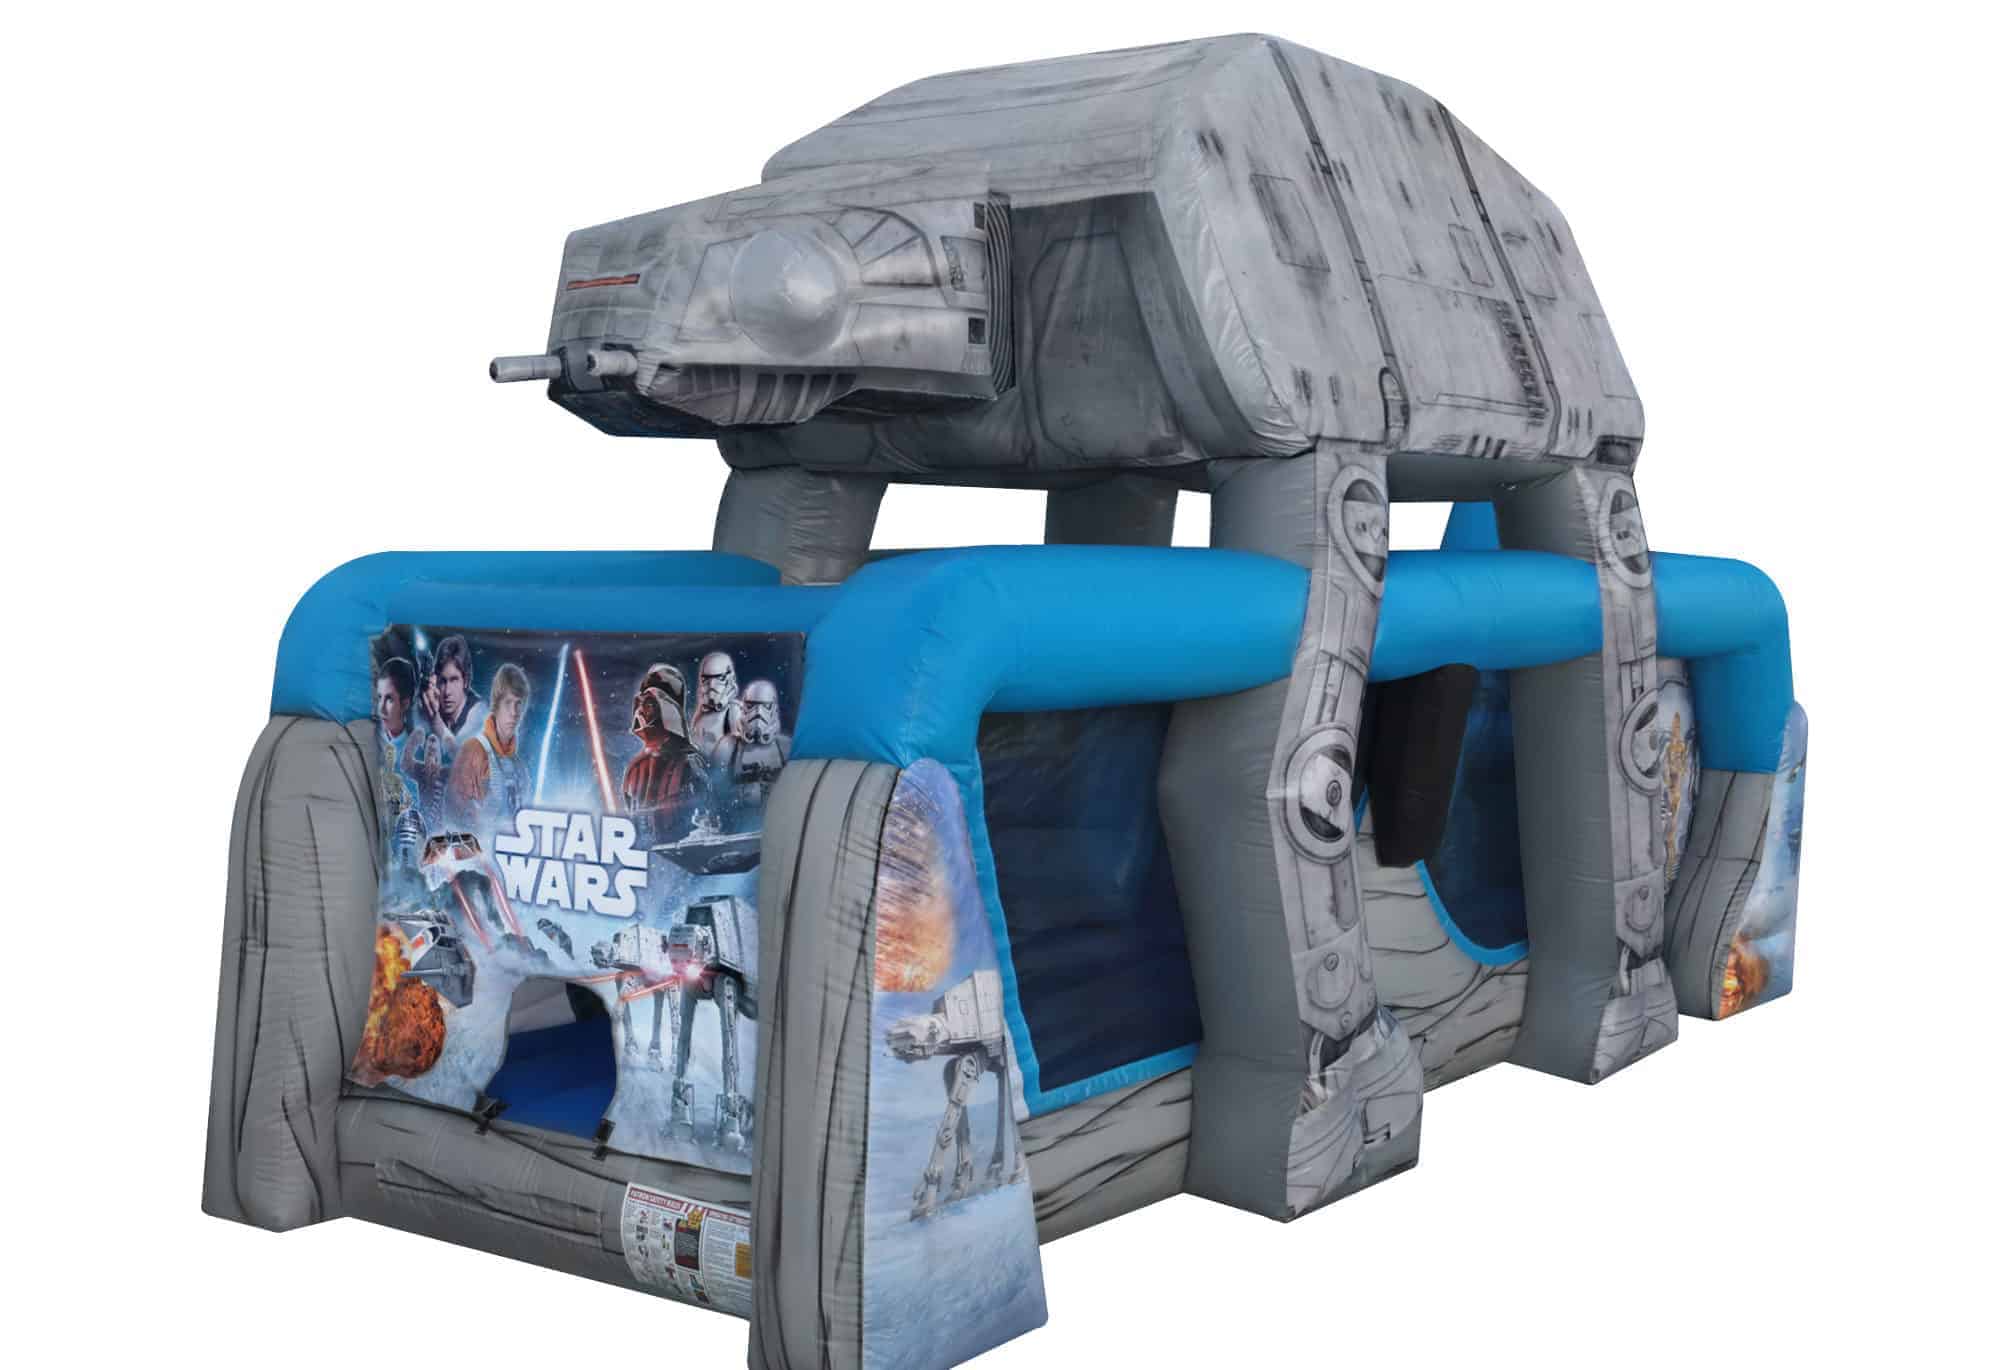 Star Wars-themed Obstacle Course